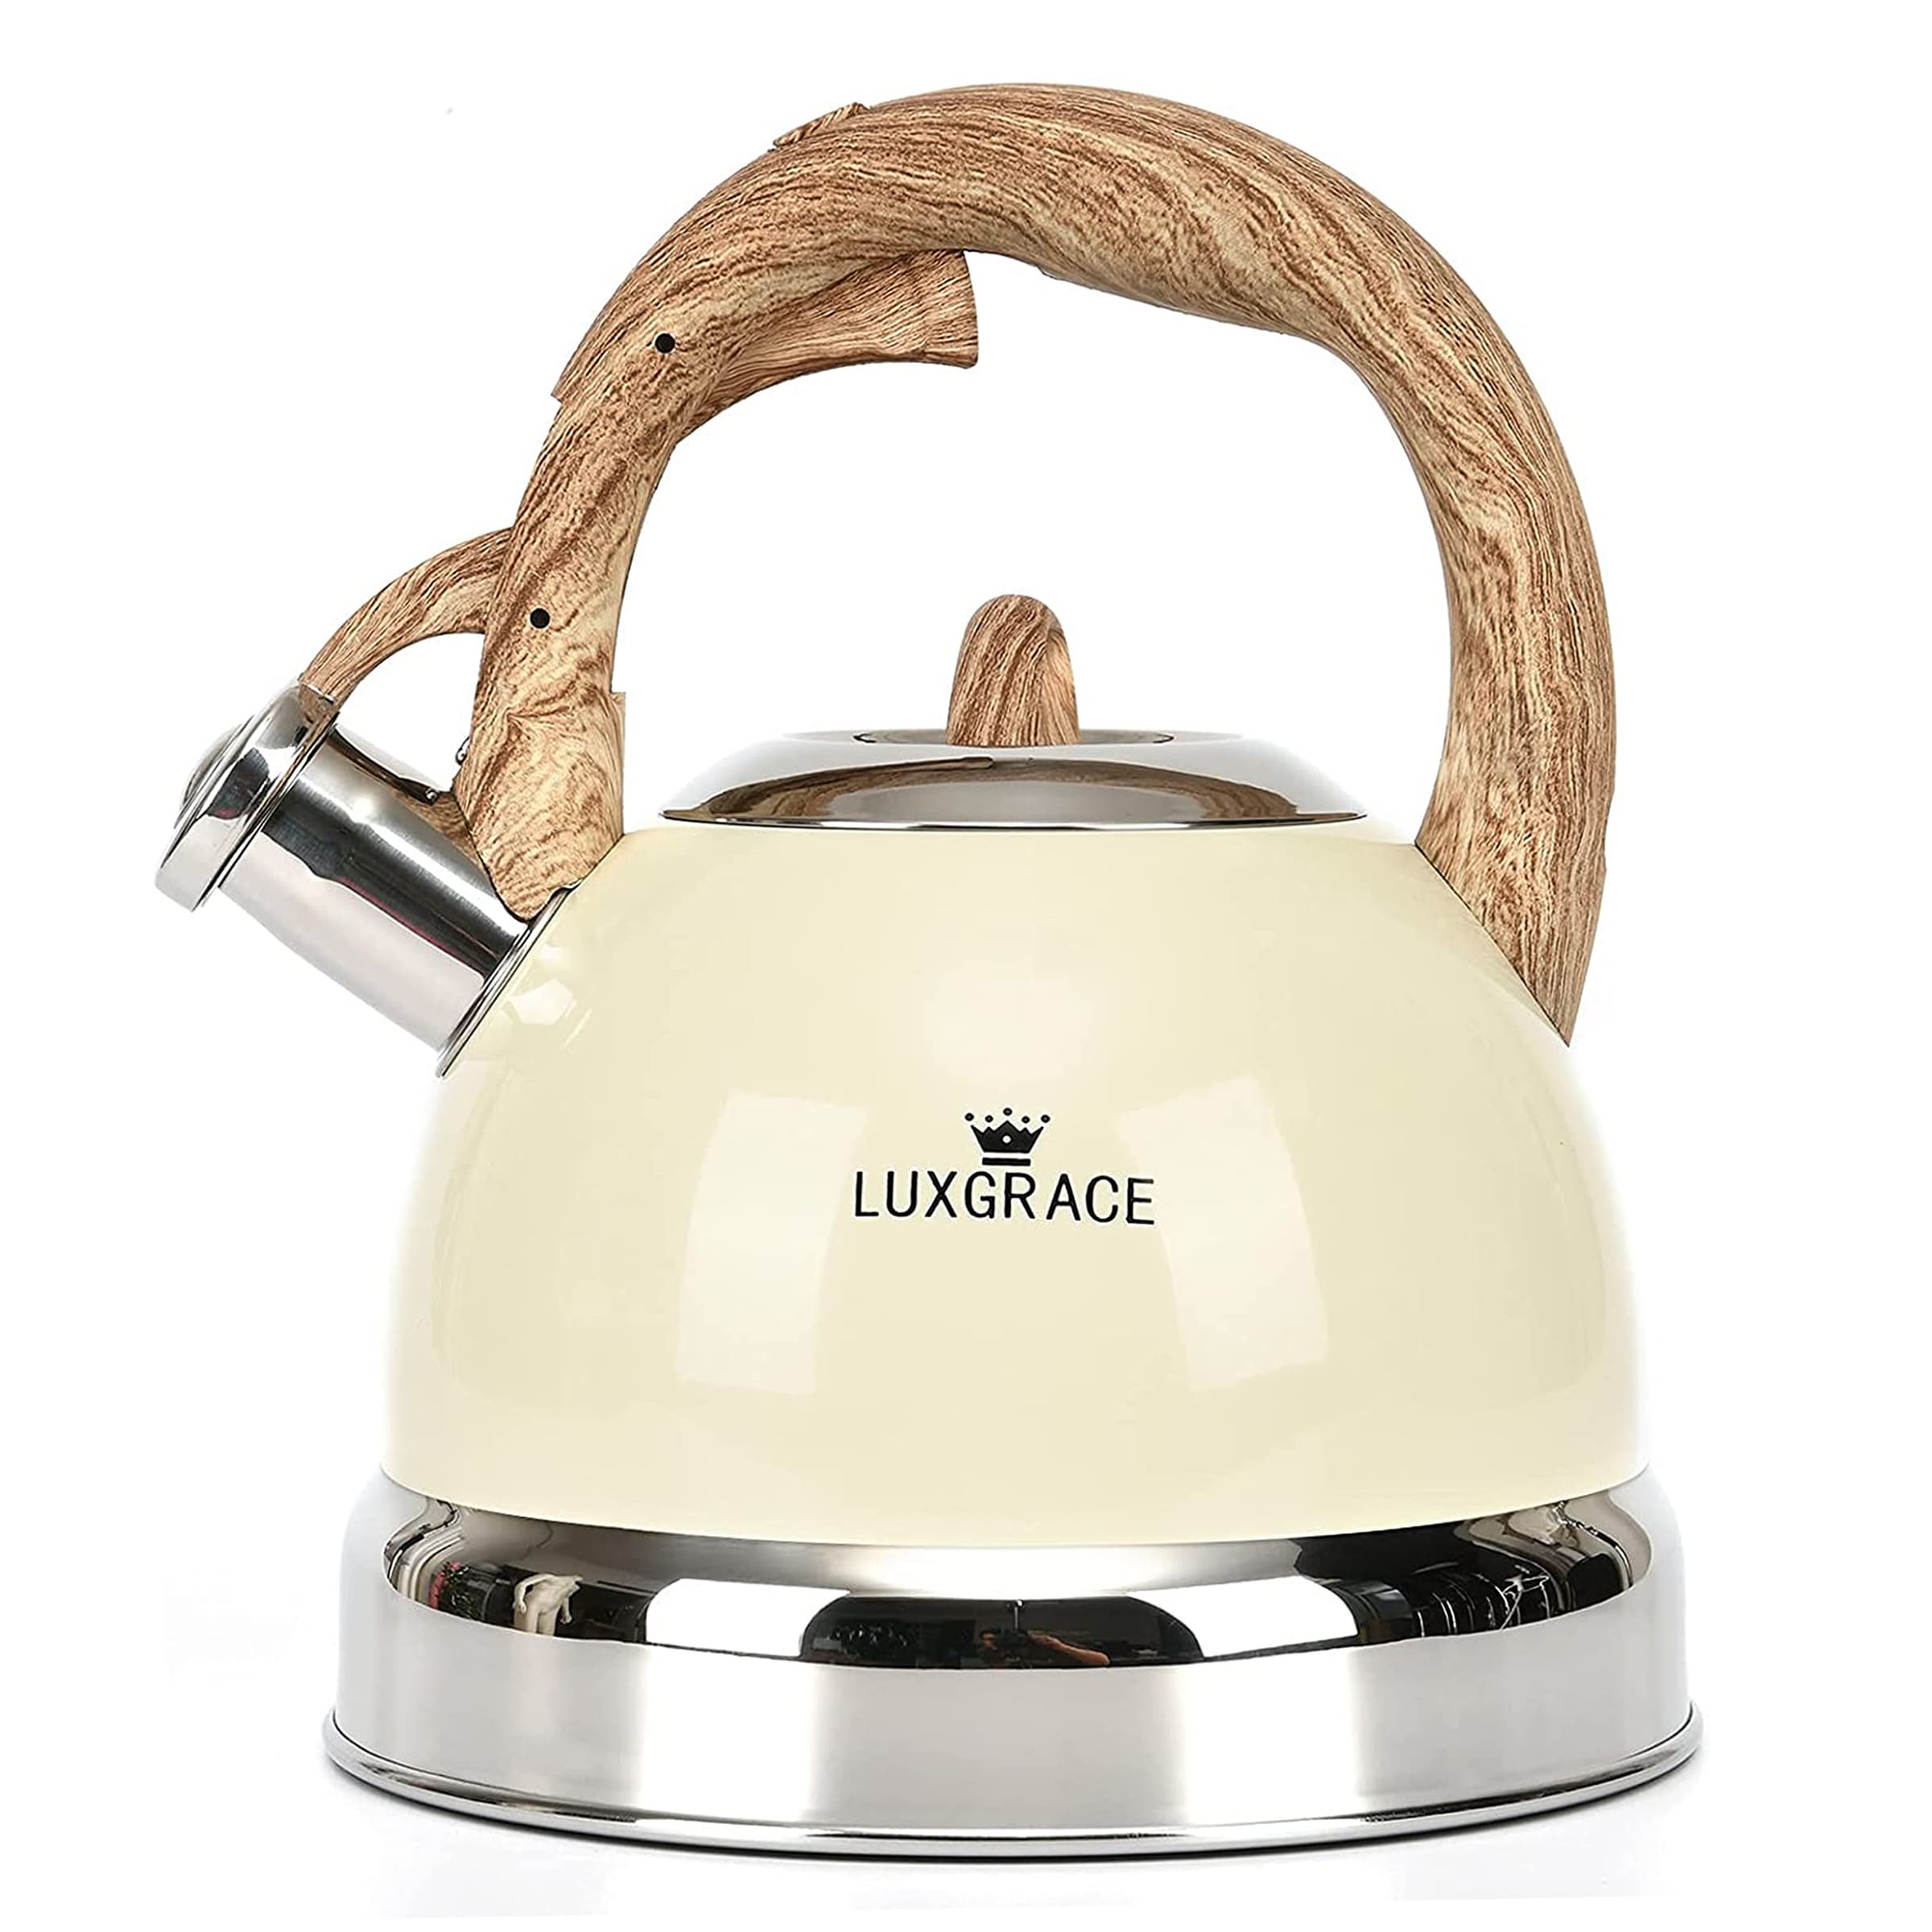 ELITRA Stove Top Whistling Fancy Tea Kettle - Stainless Steel 2.7